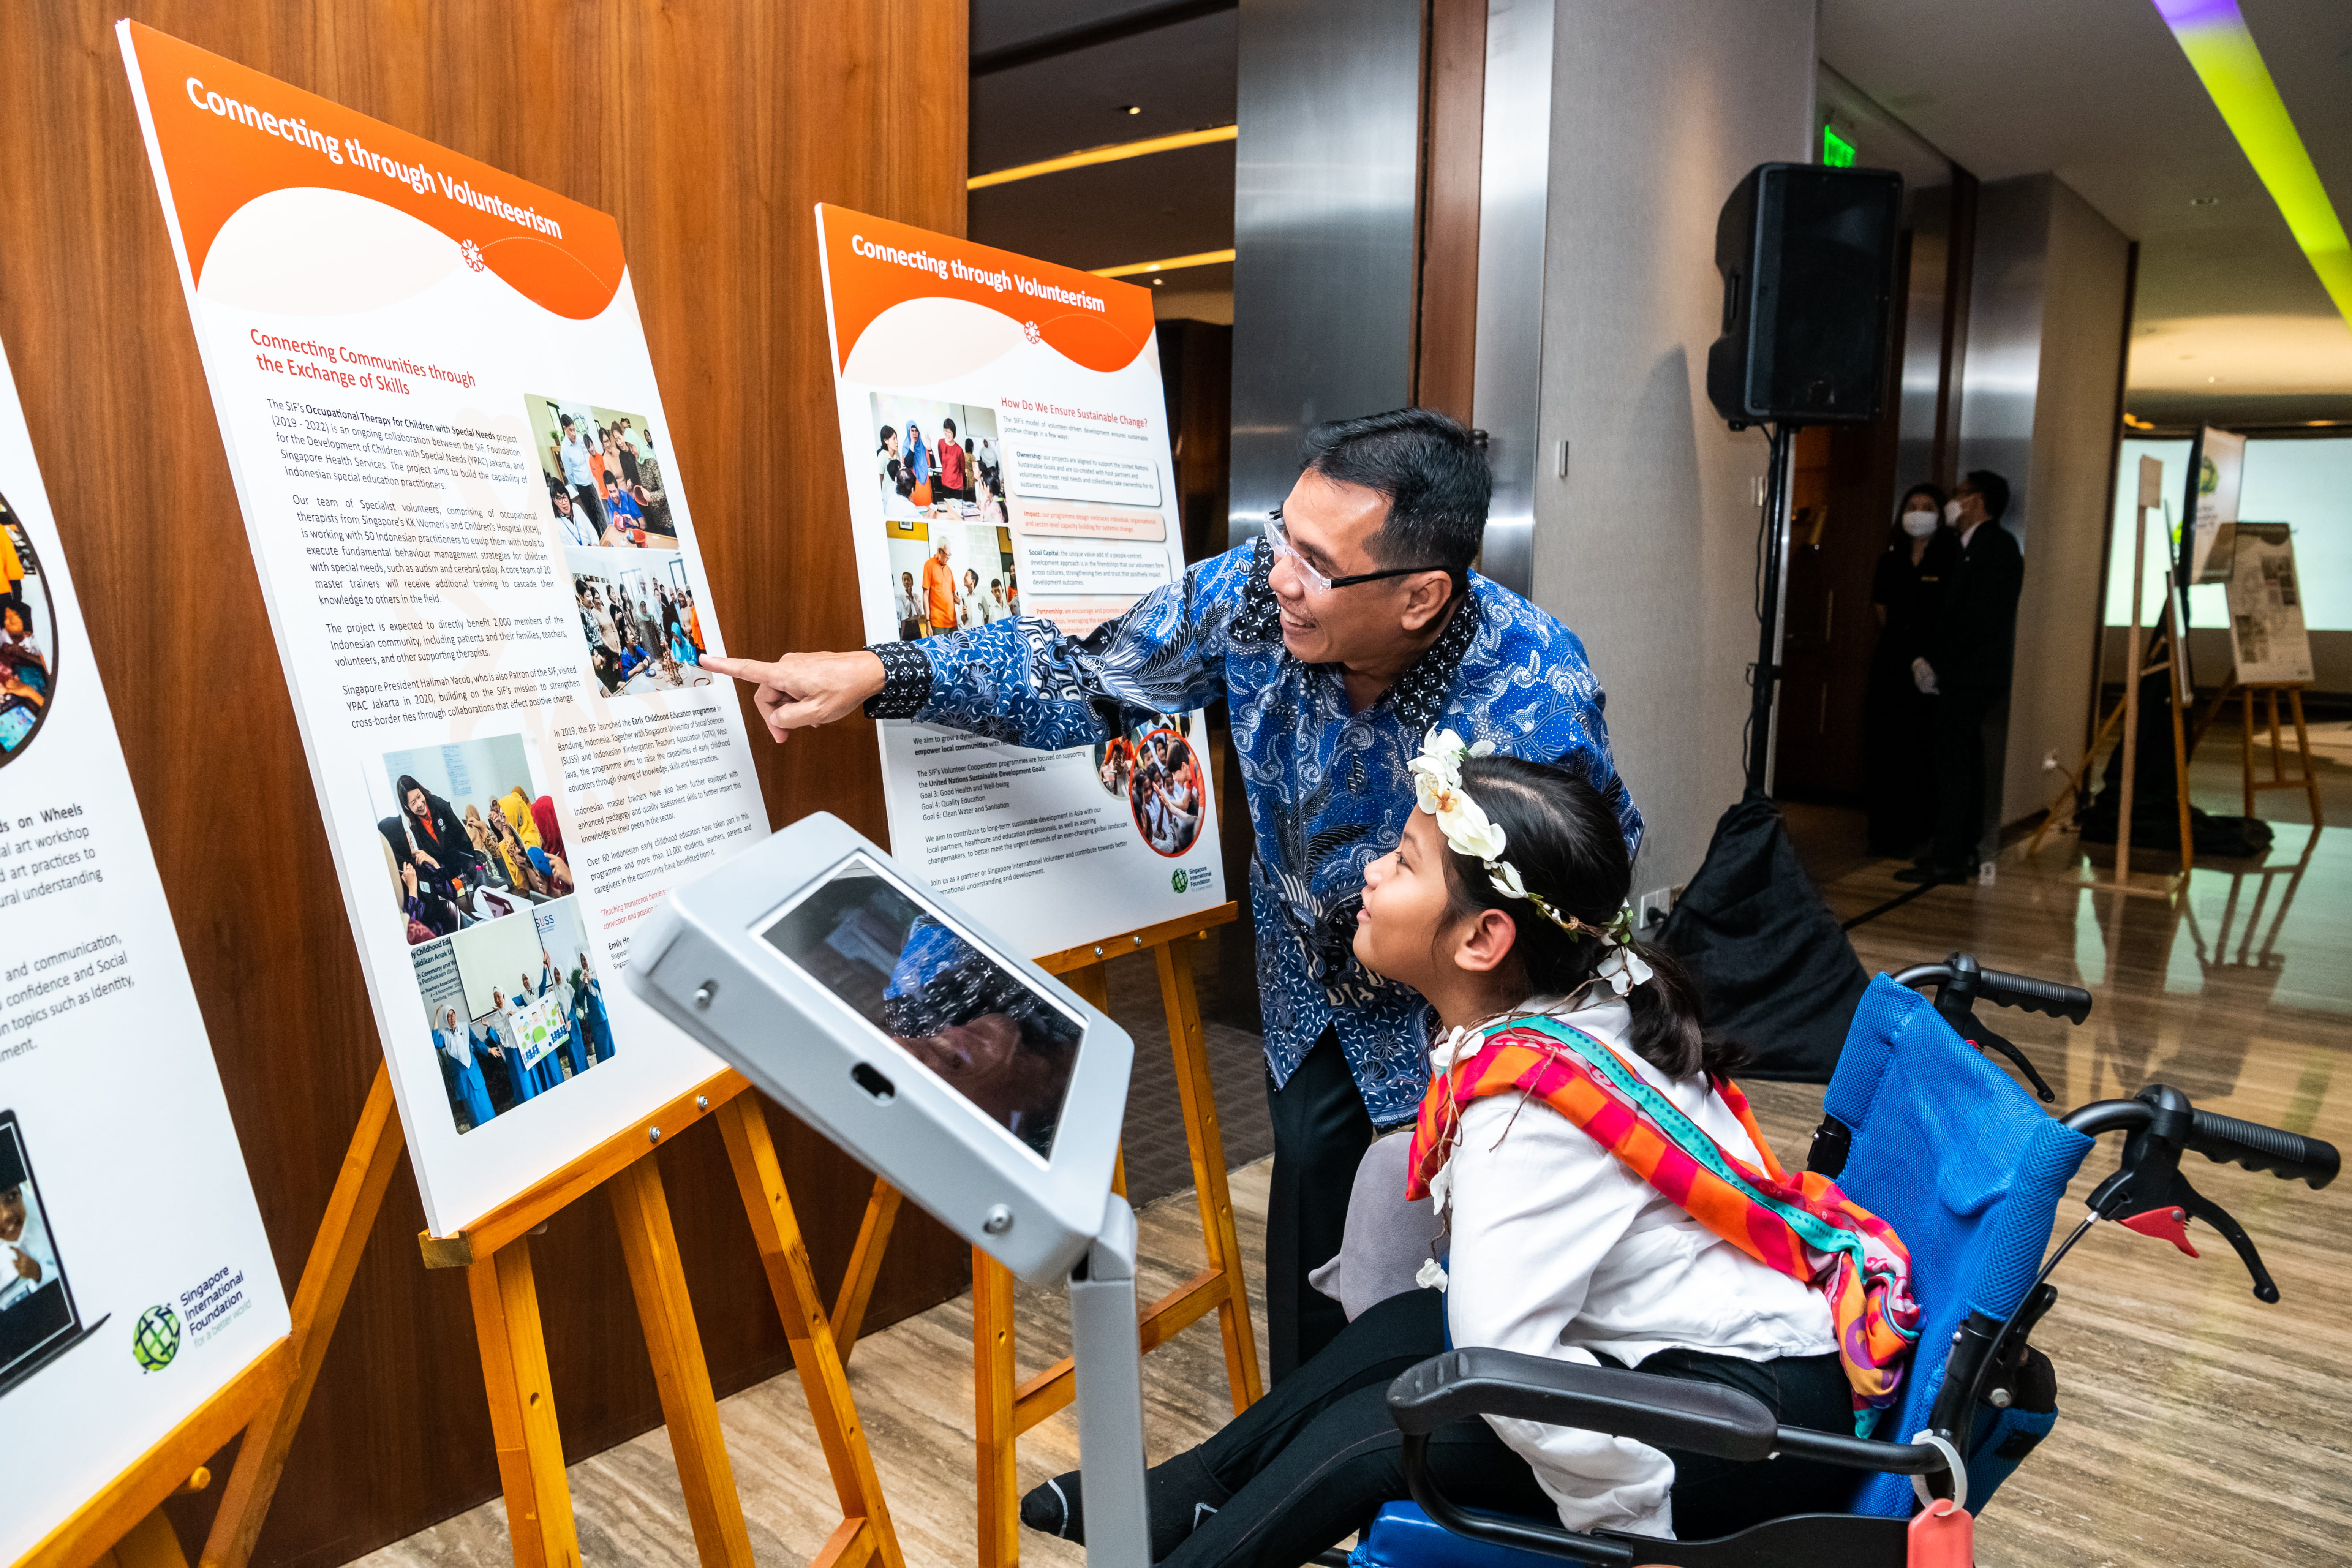 Mr Agoes Abdoel Rakhman, Managing Director, YPAC Jakarta showing his student a photo of the ‘Occupational Therapy for Children with Special Needs’ project, a collaboration between the SIF and YPAC Jakarta aimed to enhance support for children with special needs in Jakarta.